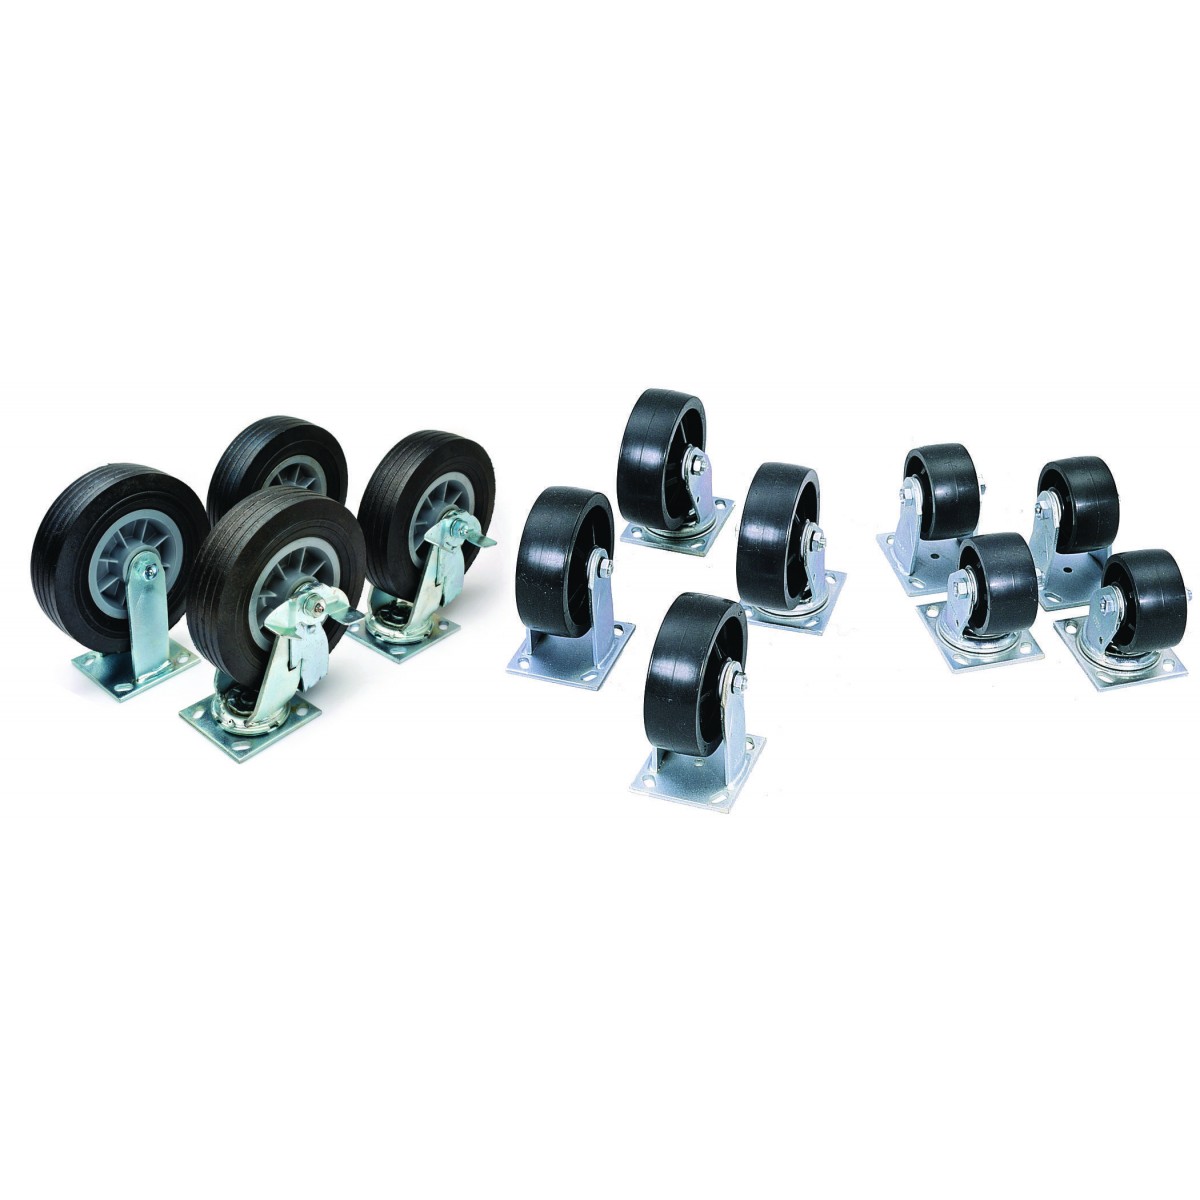 6 in. Casters - Set of 4 (2 Swivel and 2 Fixed)